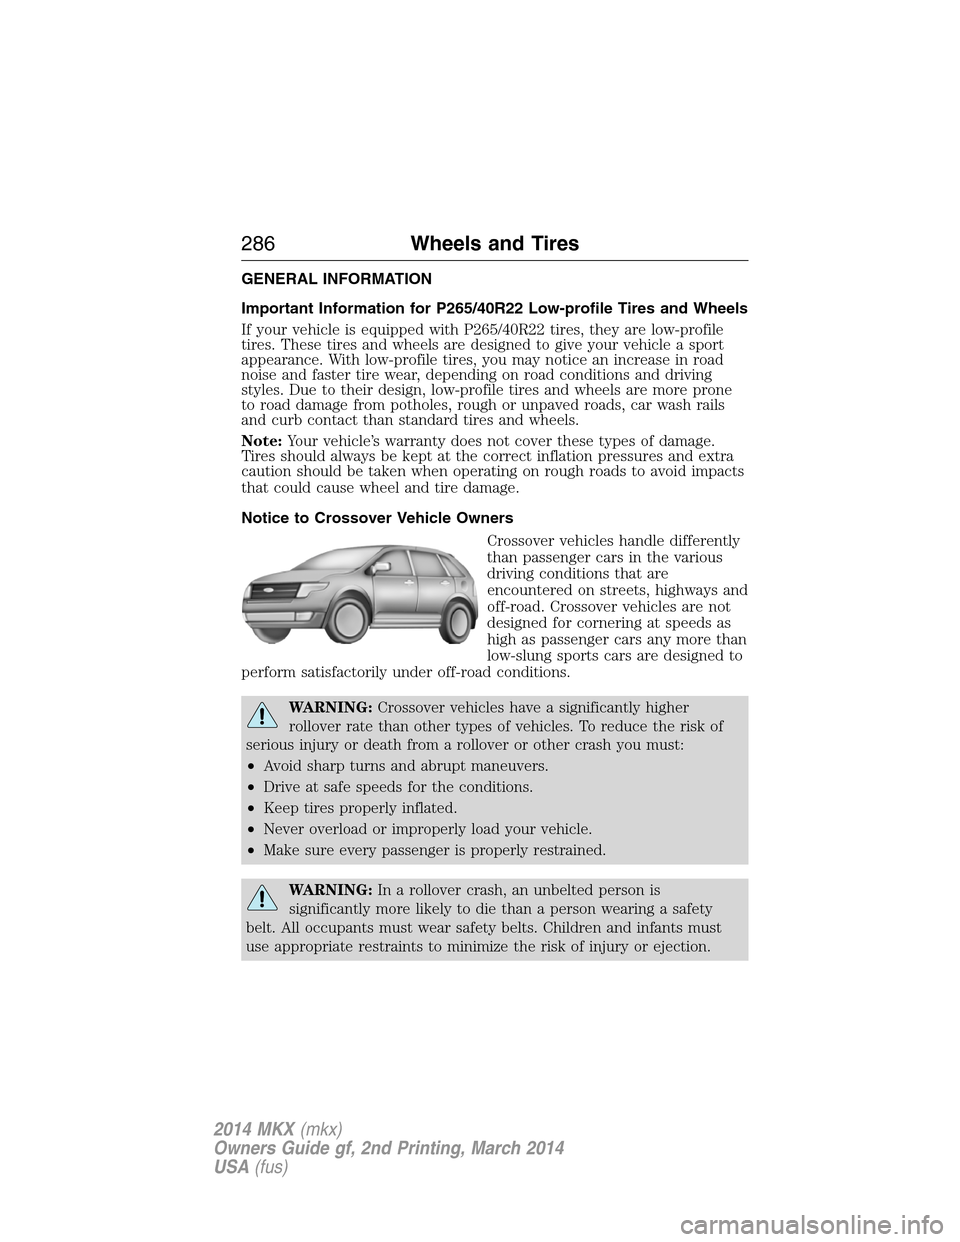 LINCOLN MKX 2014  Owners Manual GENERAL INFORMATION
Important Information for P265/40R22 Low-profile Tires and Wheels
If your vehicle is equipped with P265/40R22 tires, they are low-profile
tires. These tires and wheels are designed